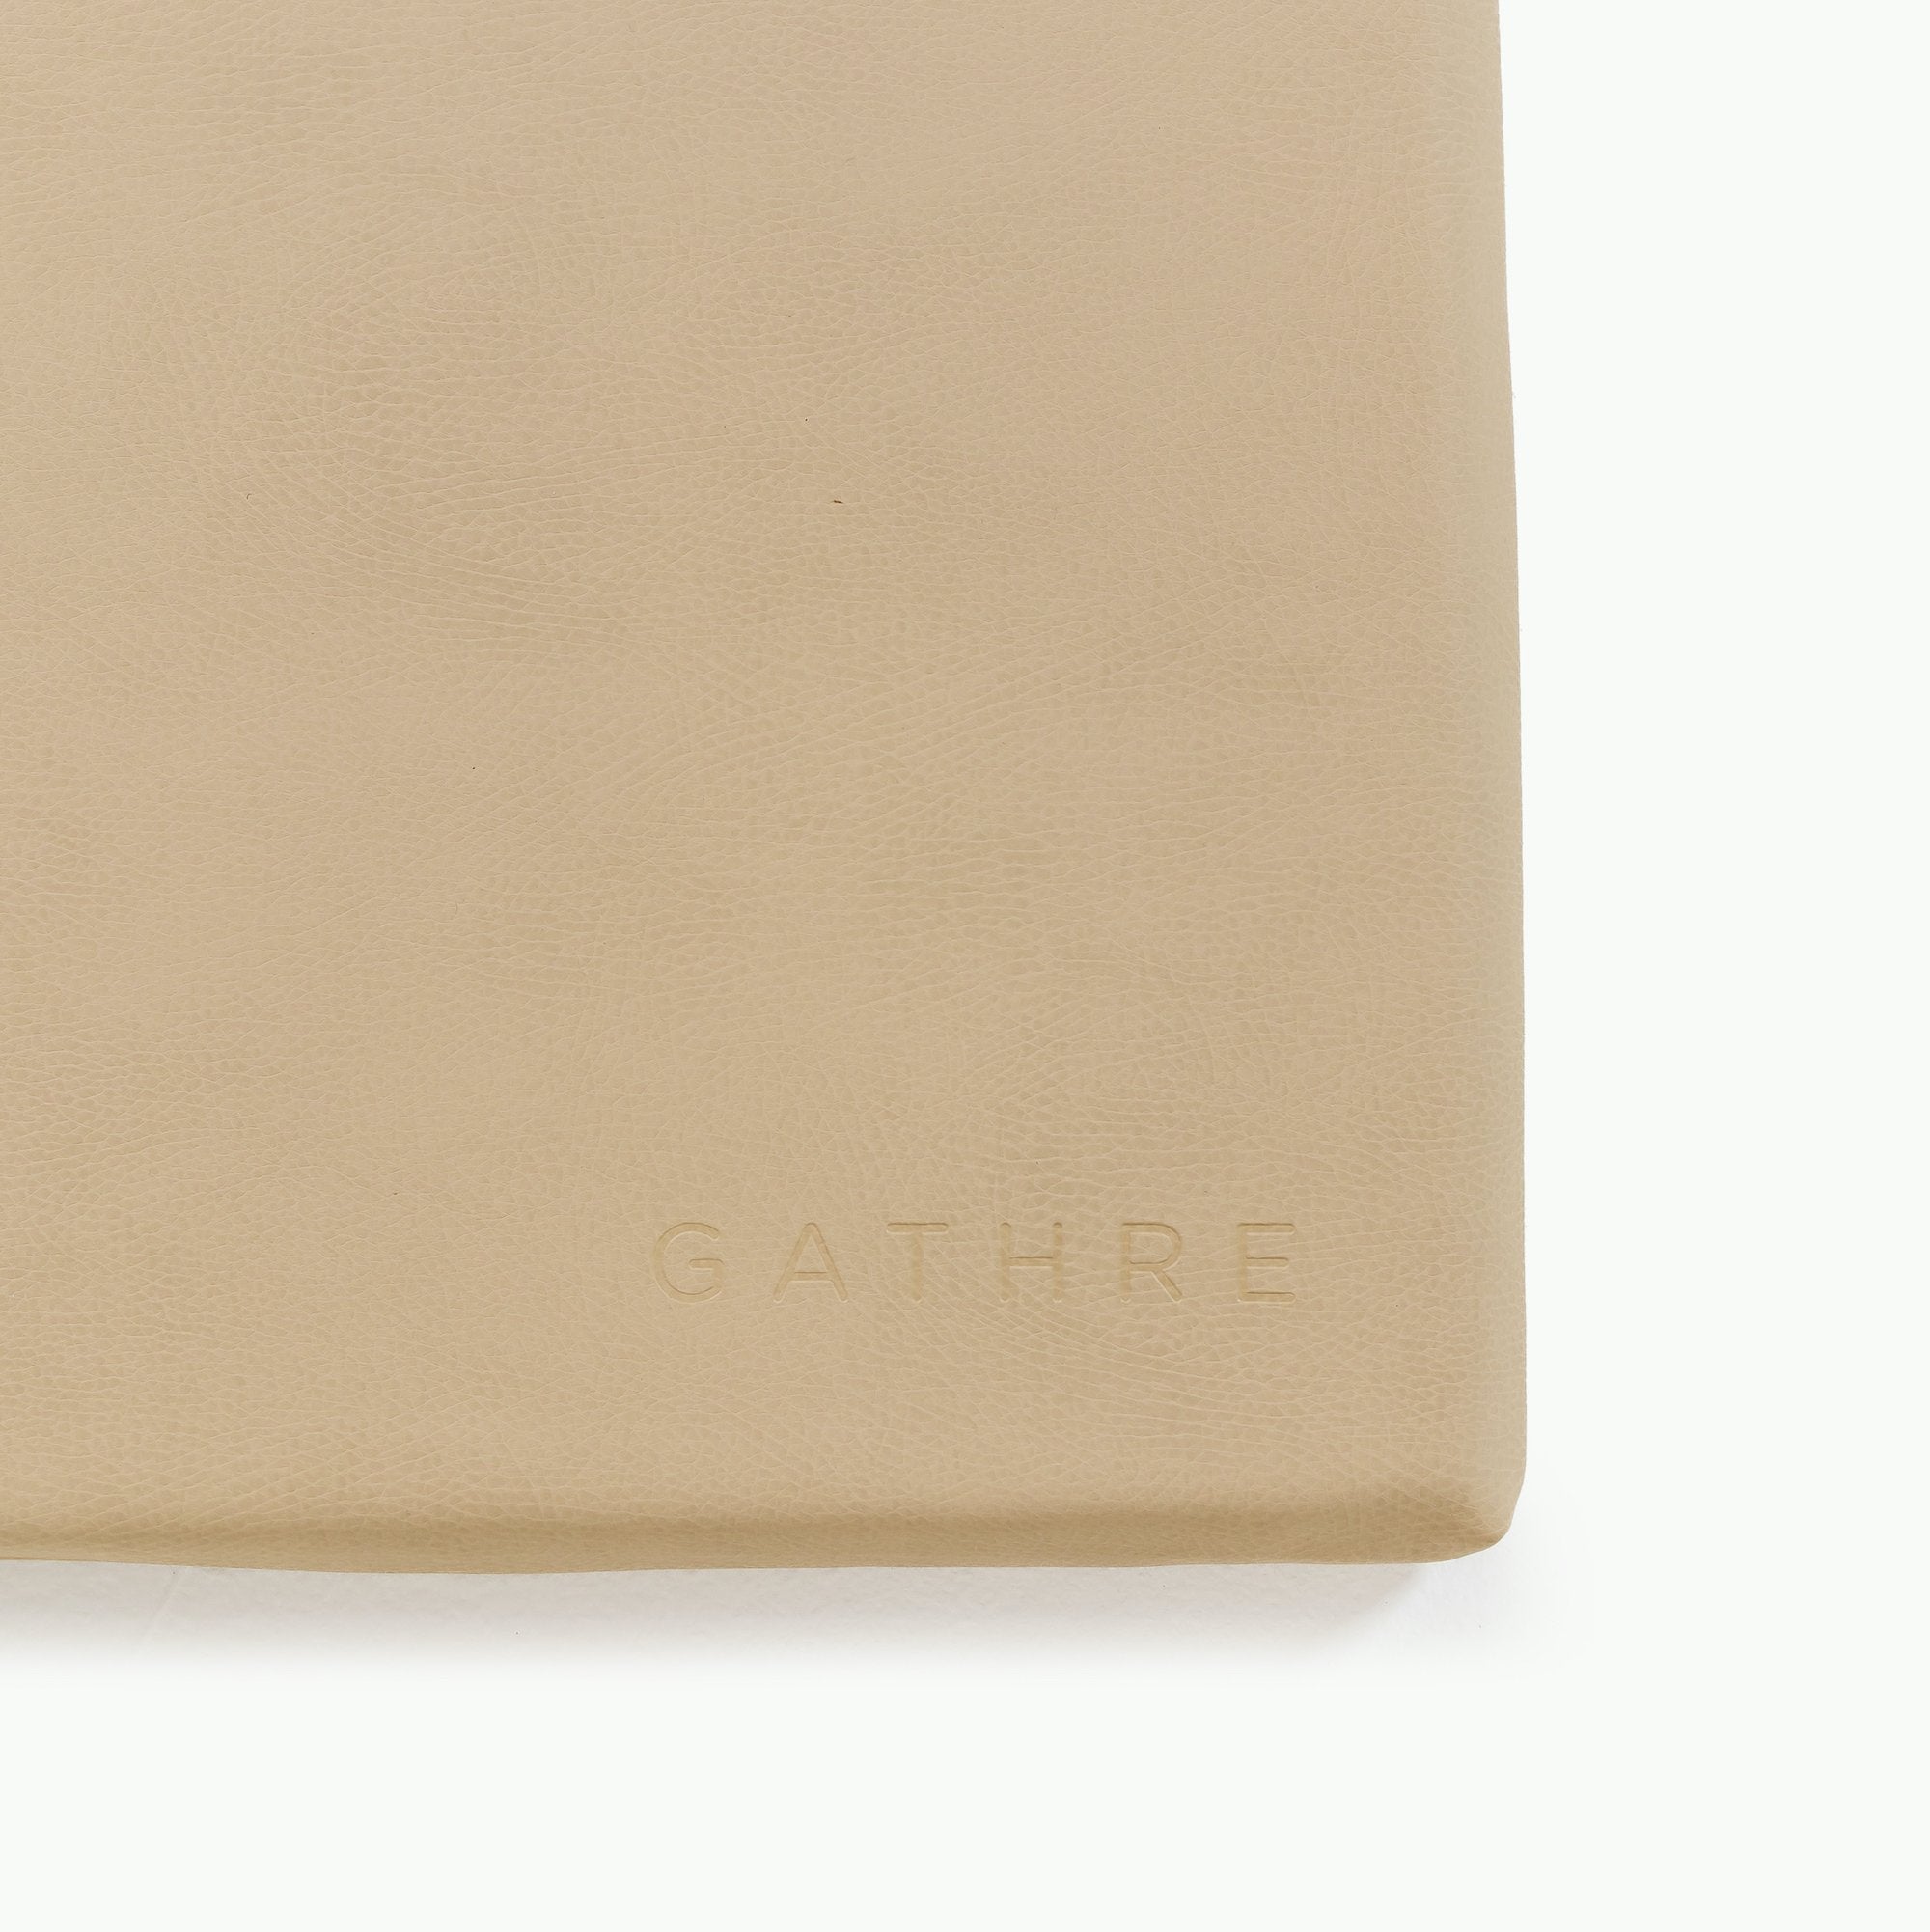 Millet@Gathre deboss detail on the Millet padded micro+